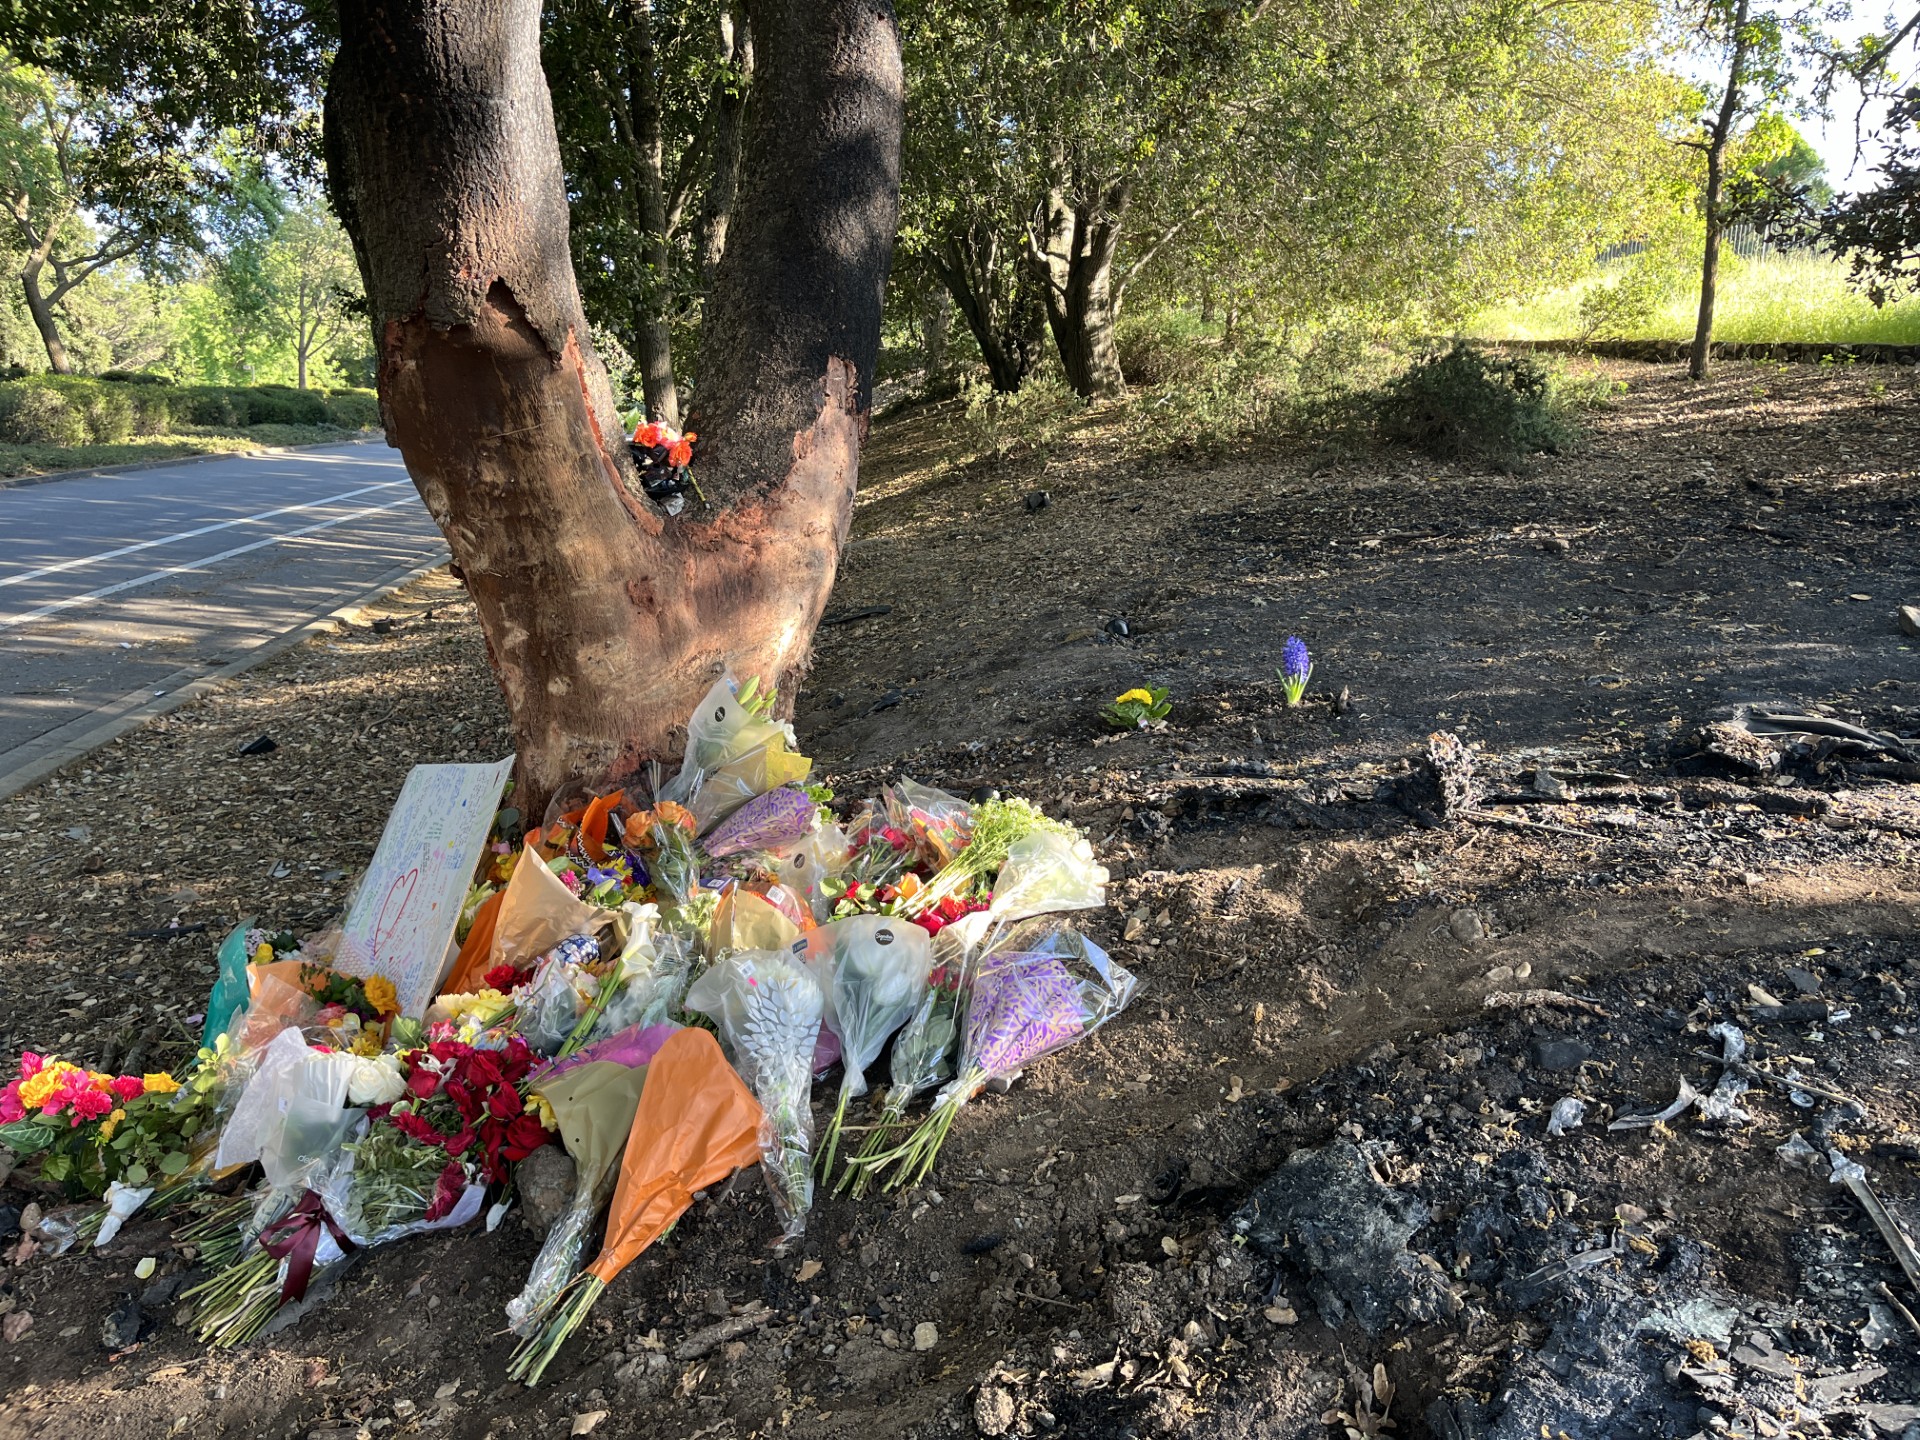 A large oak tree, scarred by burns and scratches, has many bouquets of flowers and signs resting at its base. The tree is on a dirt embankment on the side of a road.